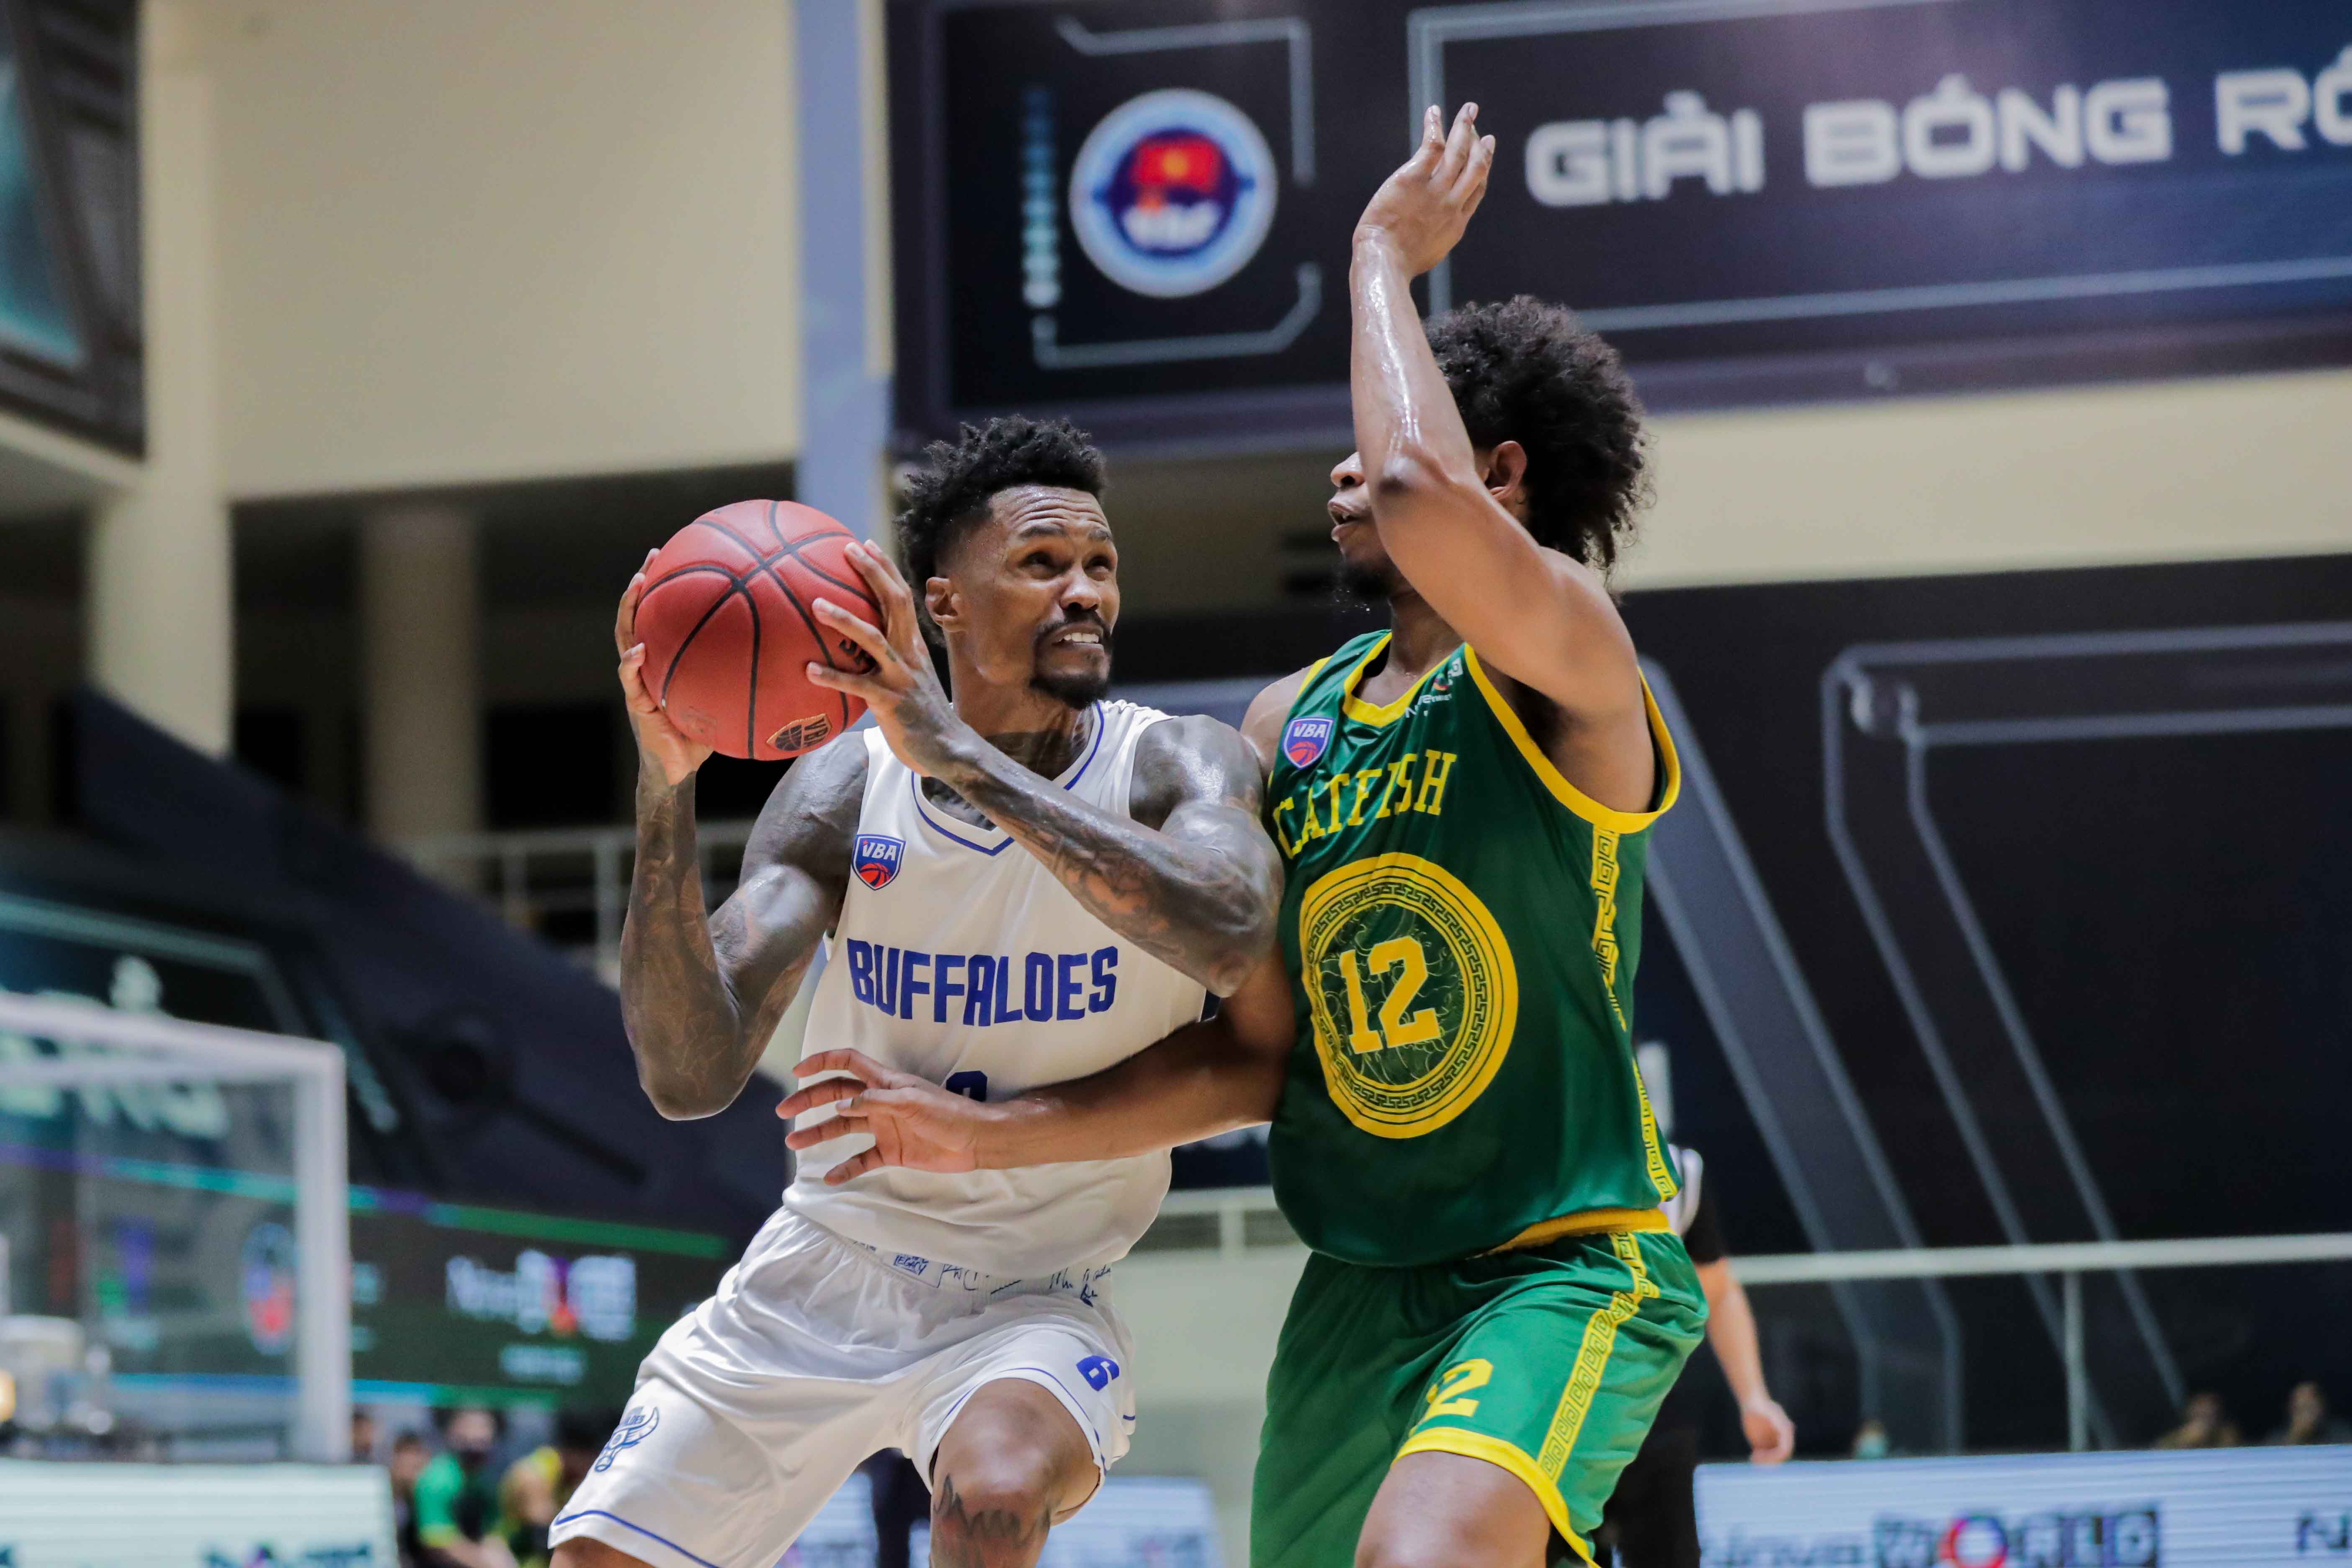 Foreign player Mike Bell leads Hanoi Buffaloes to victory over Cantho Catfish